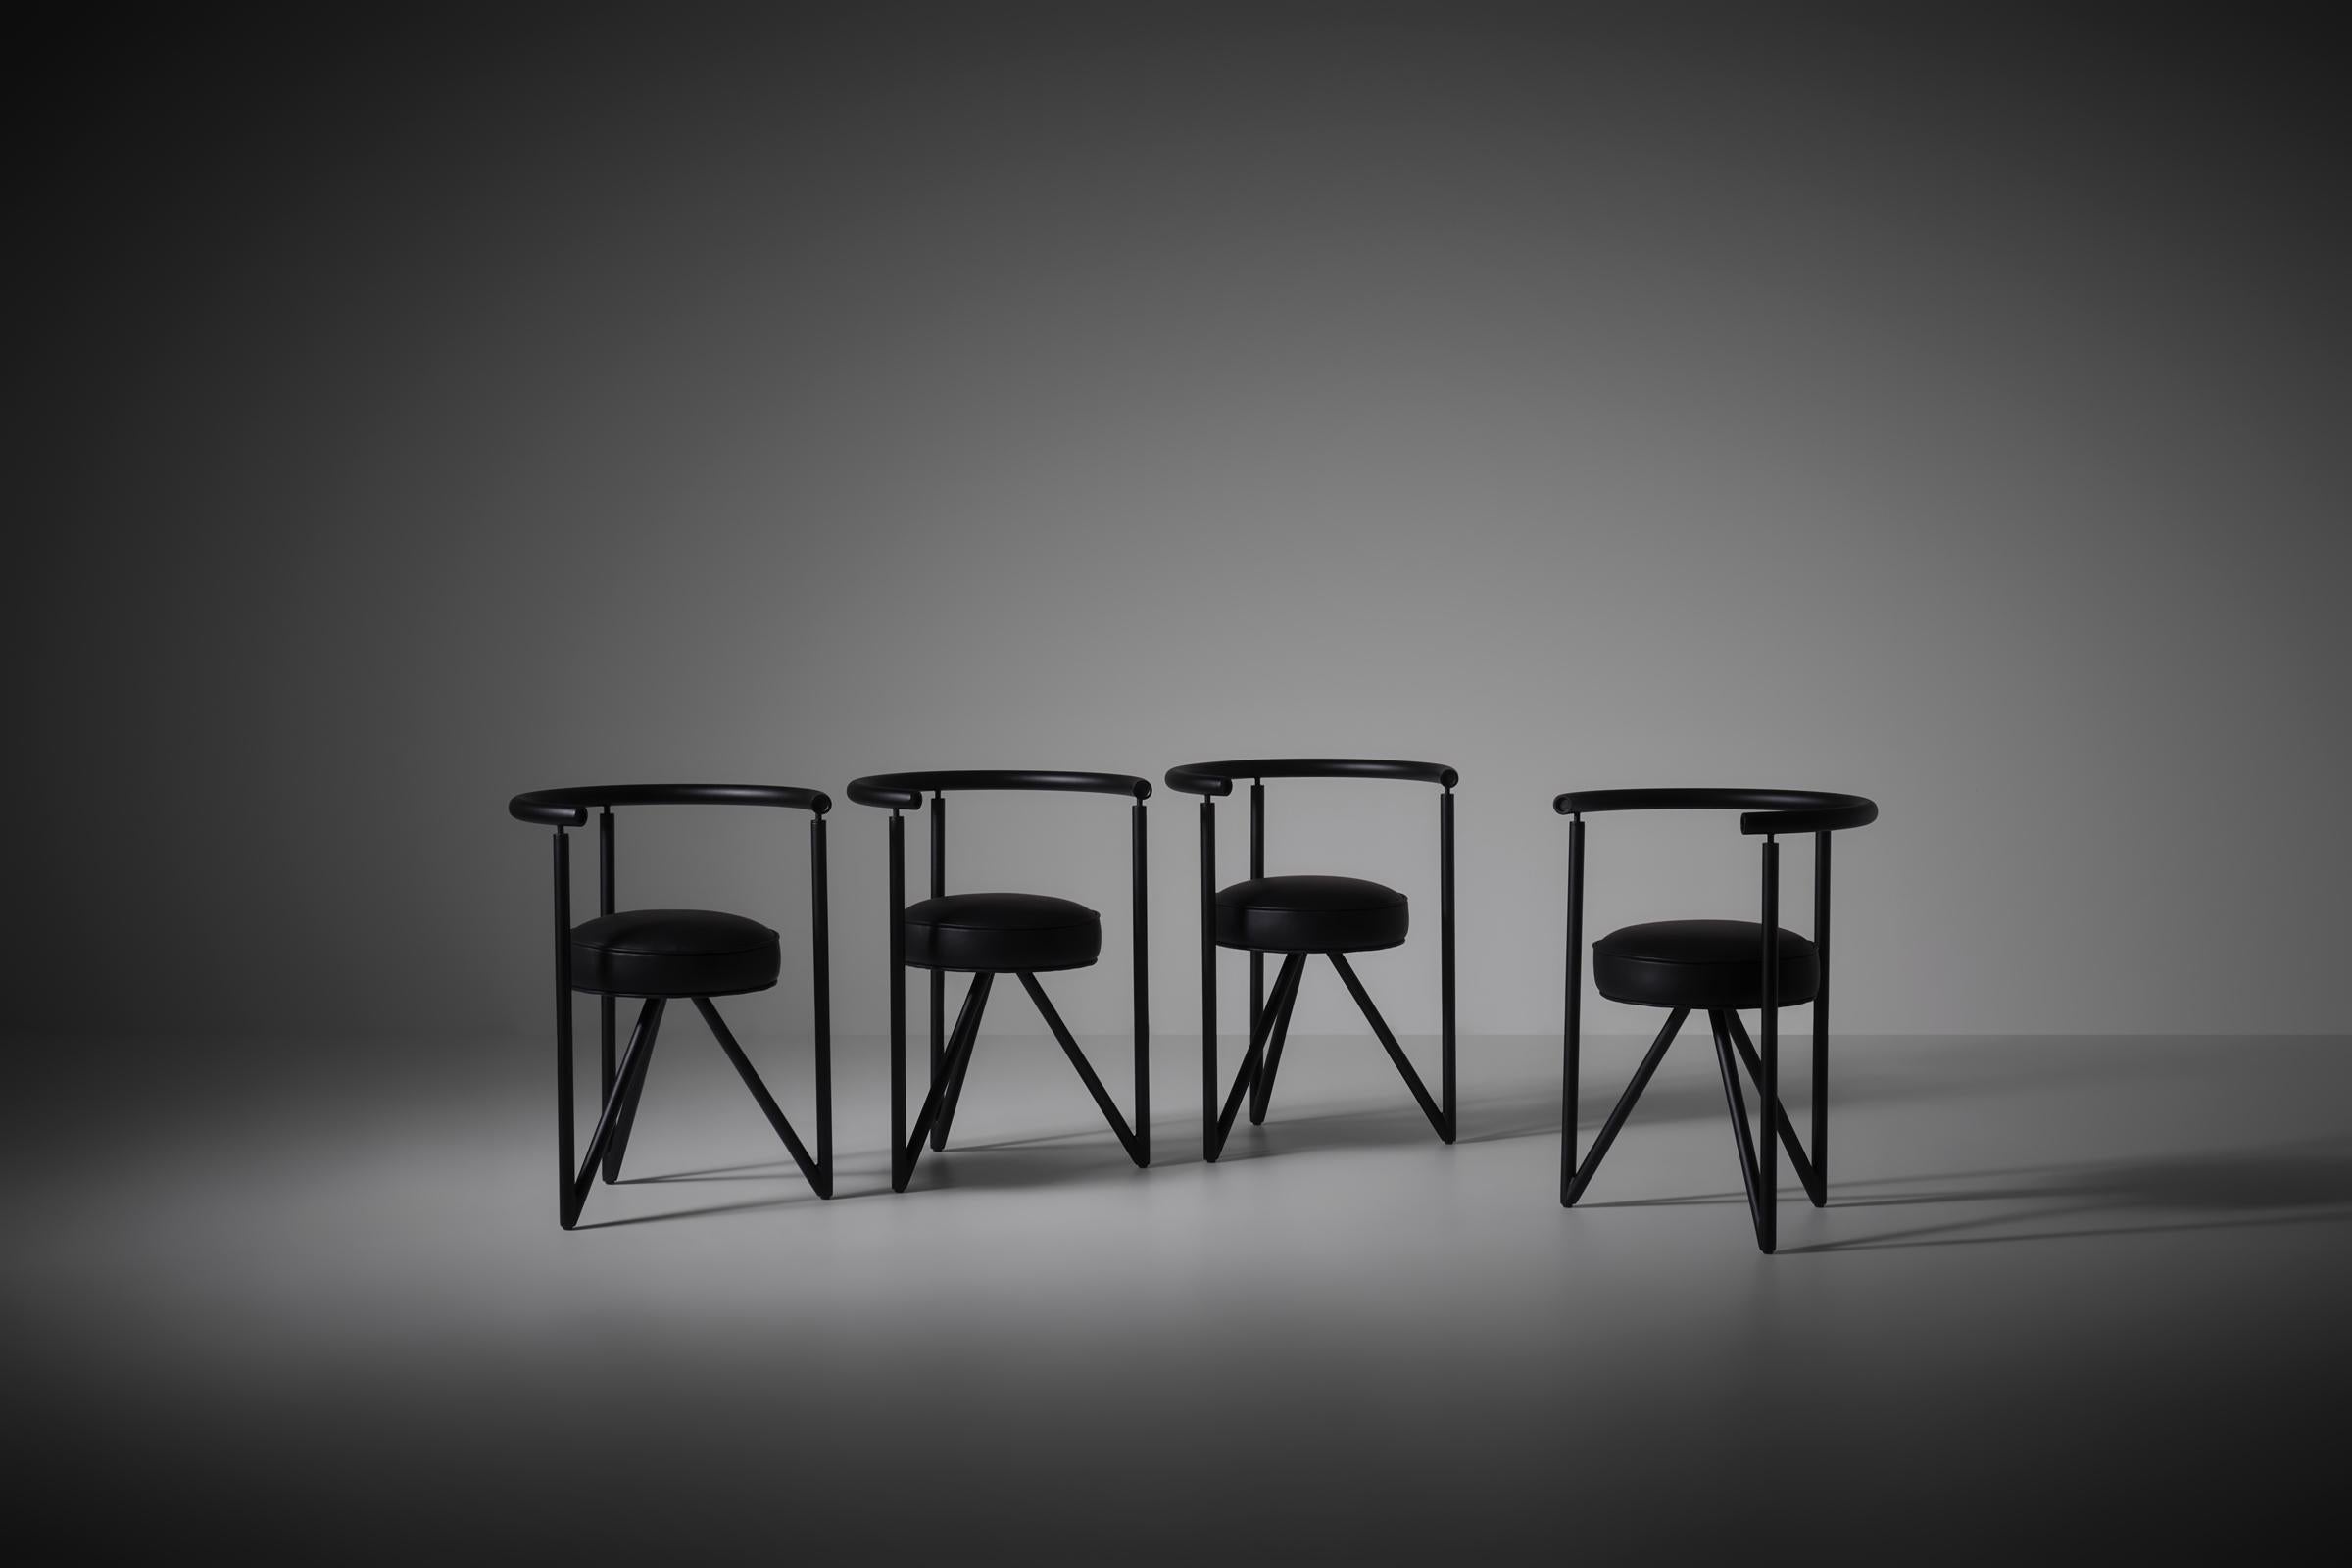 Miss Dorn chairs by Philippe Starck for Disform, 1982. Black coated tubular steel frames and round cylindrical black leather seats. The combination of their primary shapes and hard lines provide a very interesting sculptural silhouette to the